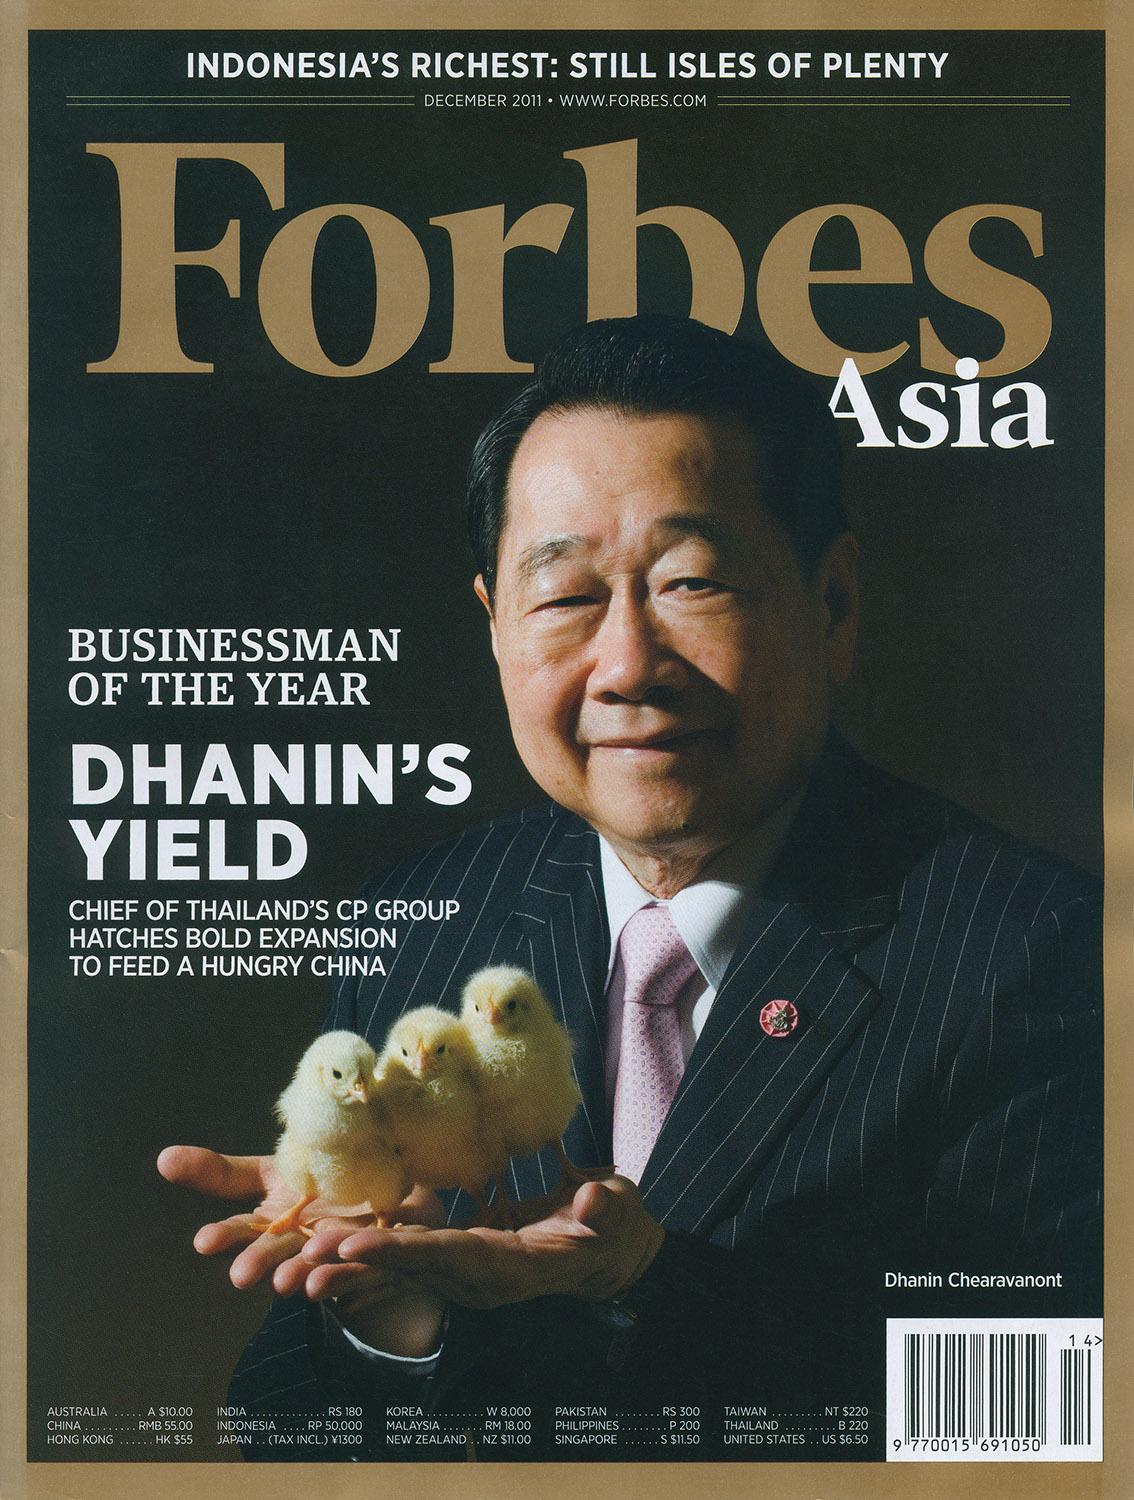 Cover of Forbes magazine featuring Businessman of the Year, Dhanin Chearavanont, Chairman and CEO of Charoen Pokphand Group (Thailand), holding three chicks.